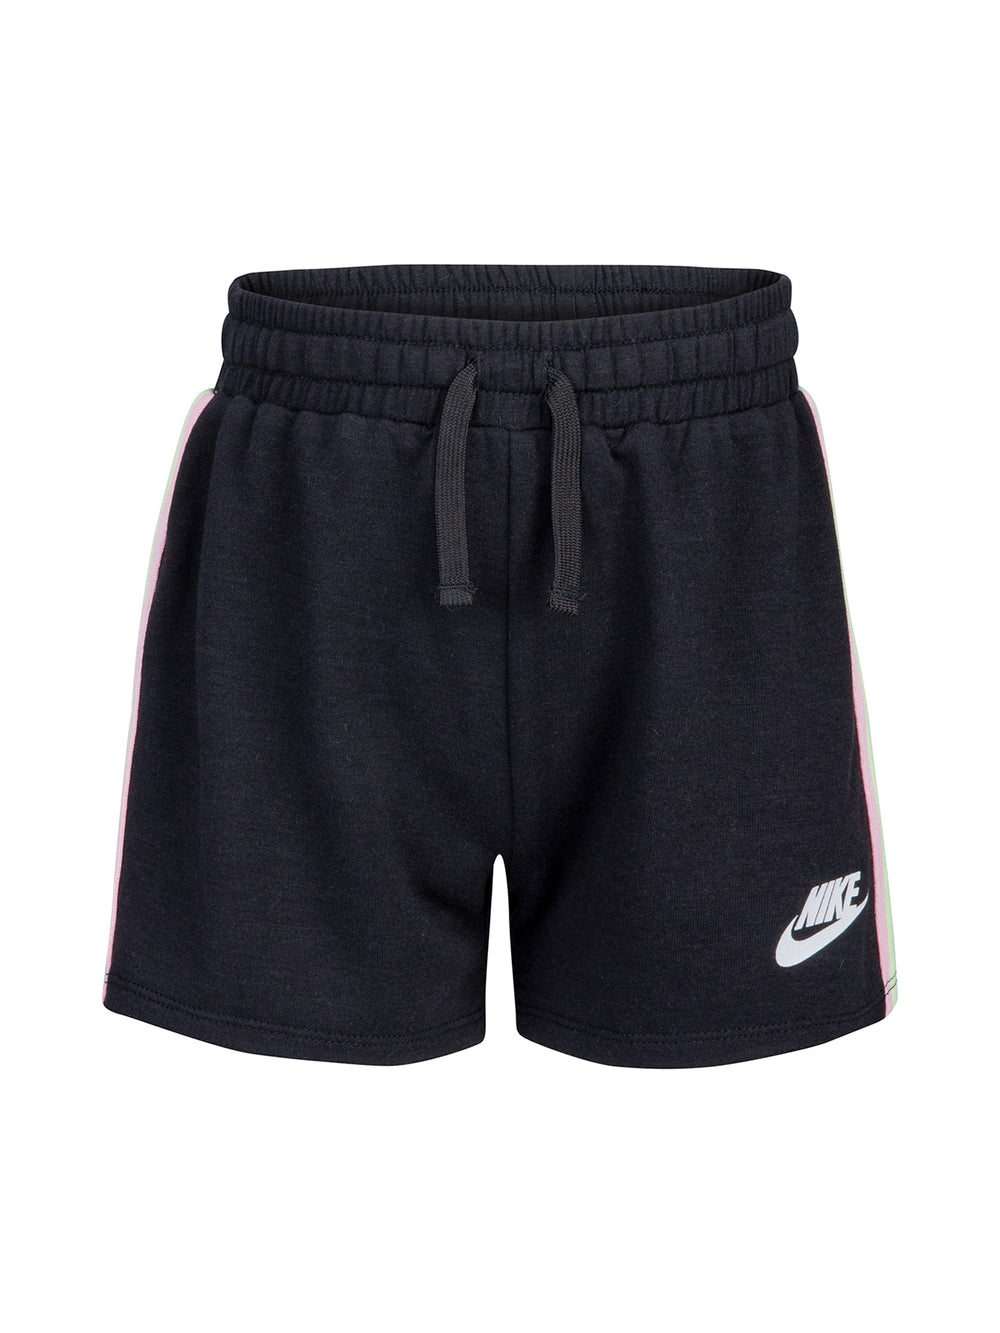 LITTLE GIRLS NIKE WILDFLOWER FRENCH TERRY SHORT - CLEARANCE